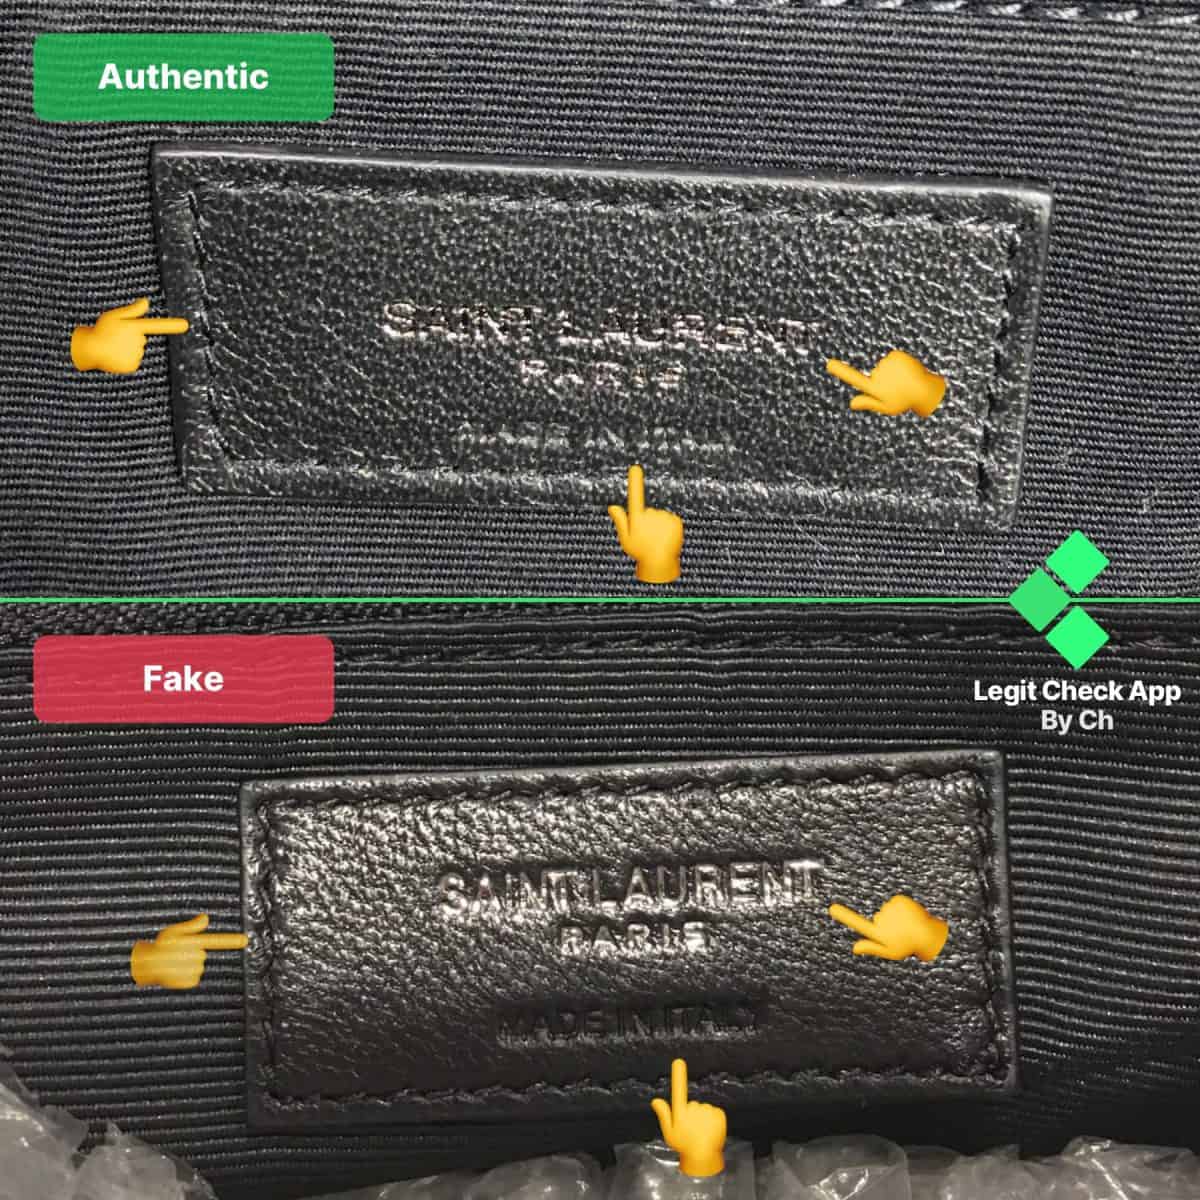 how to tell if a ysl niki bag is real